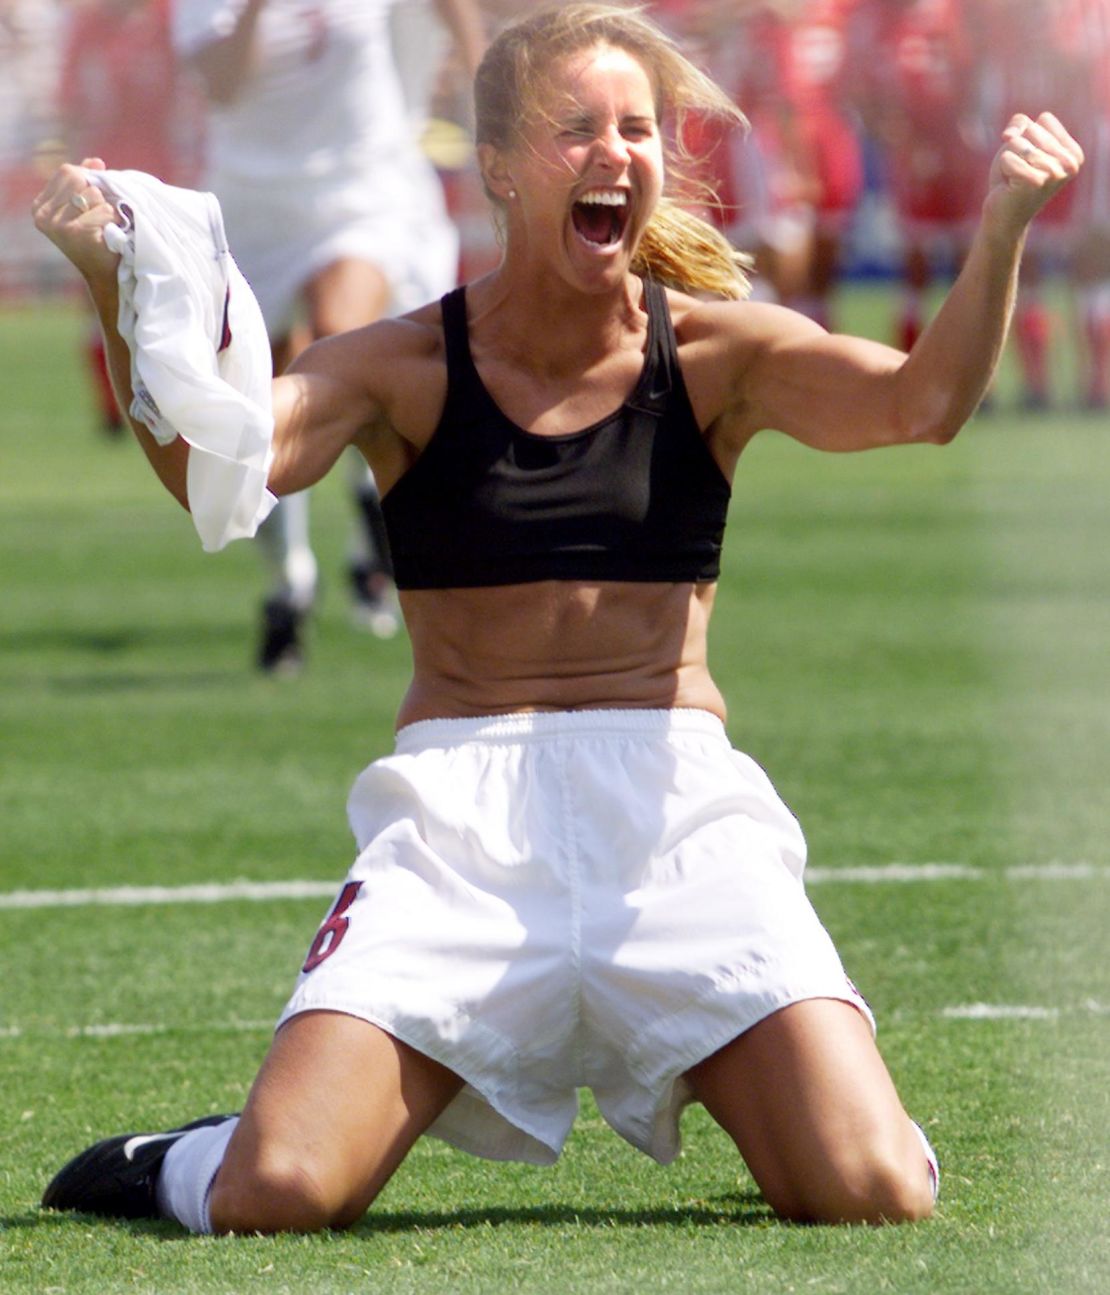 Chastain celebrates after scoring in a shoot-out in the final of the Women's World Cup